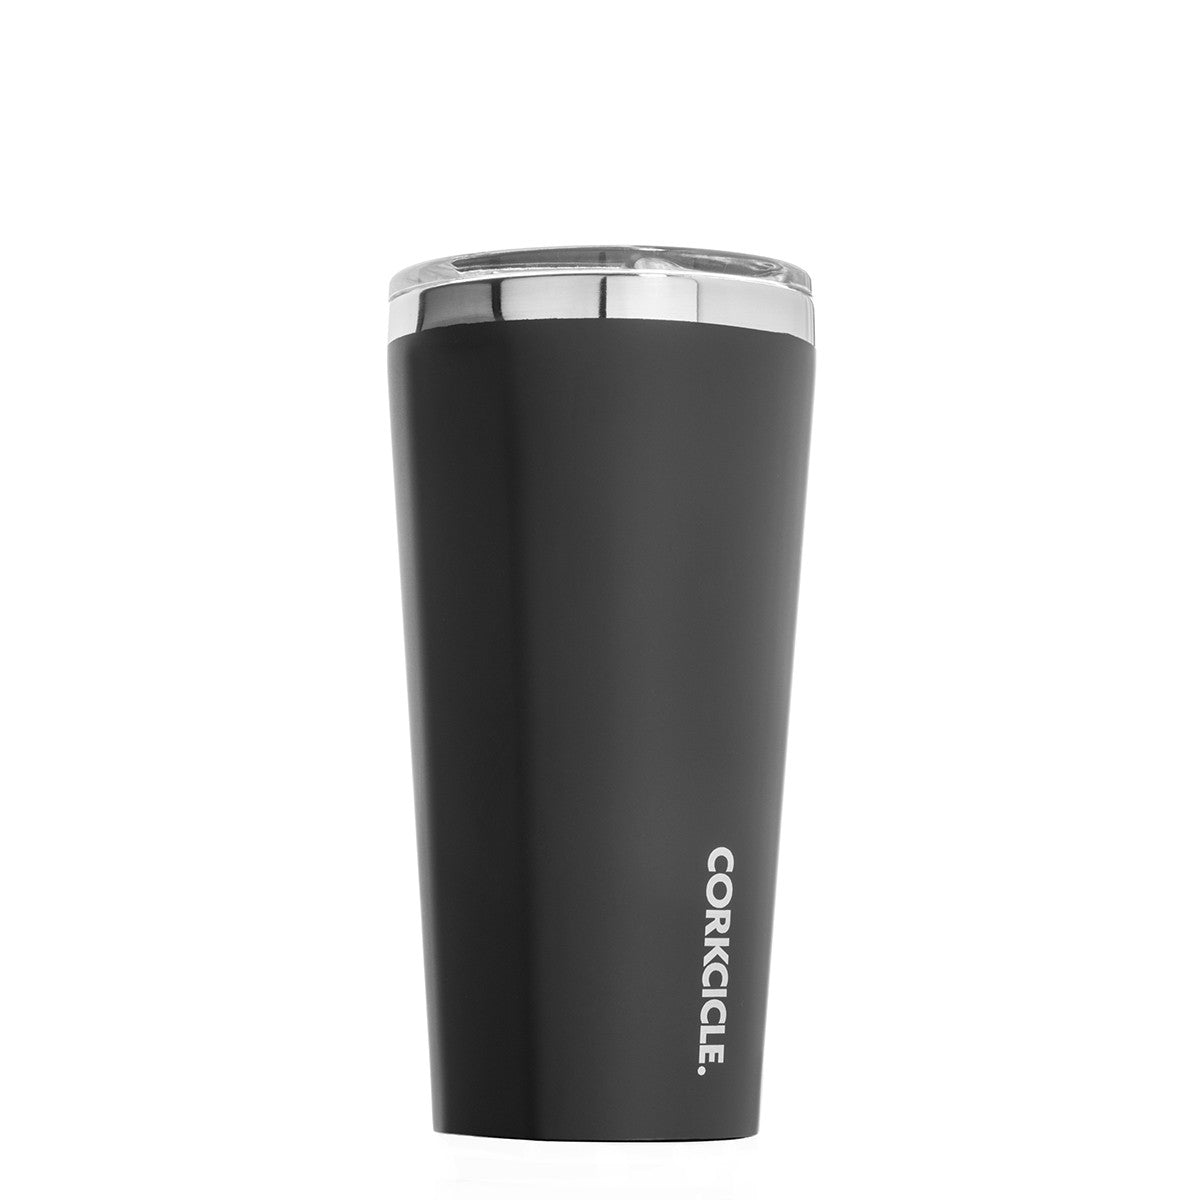 Corkcicle Classic Tumbler 475ml - Matt Black Insulated Stainless Steel Cup